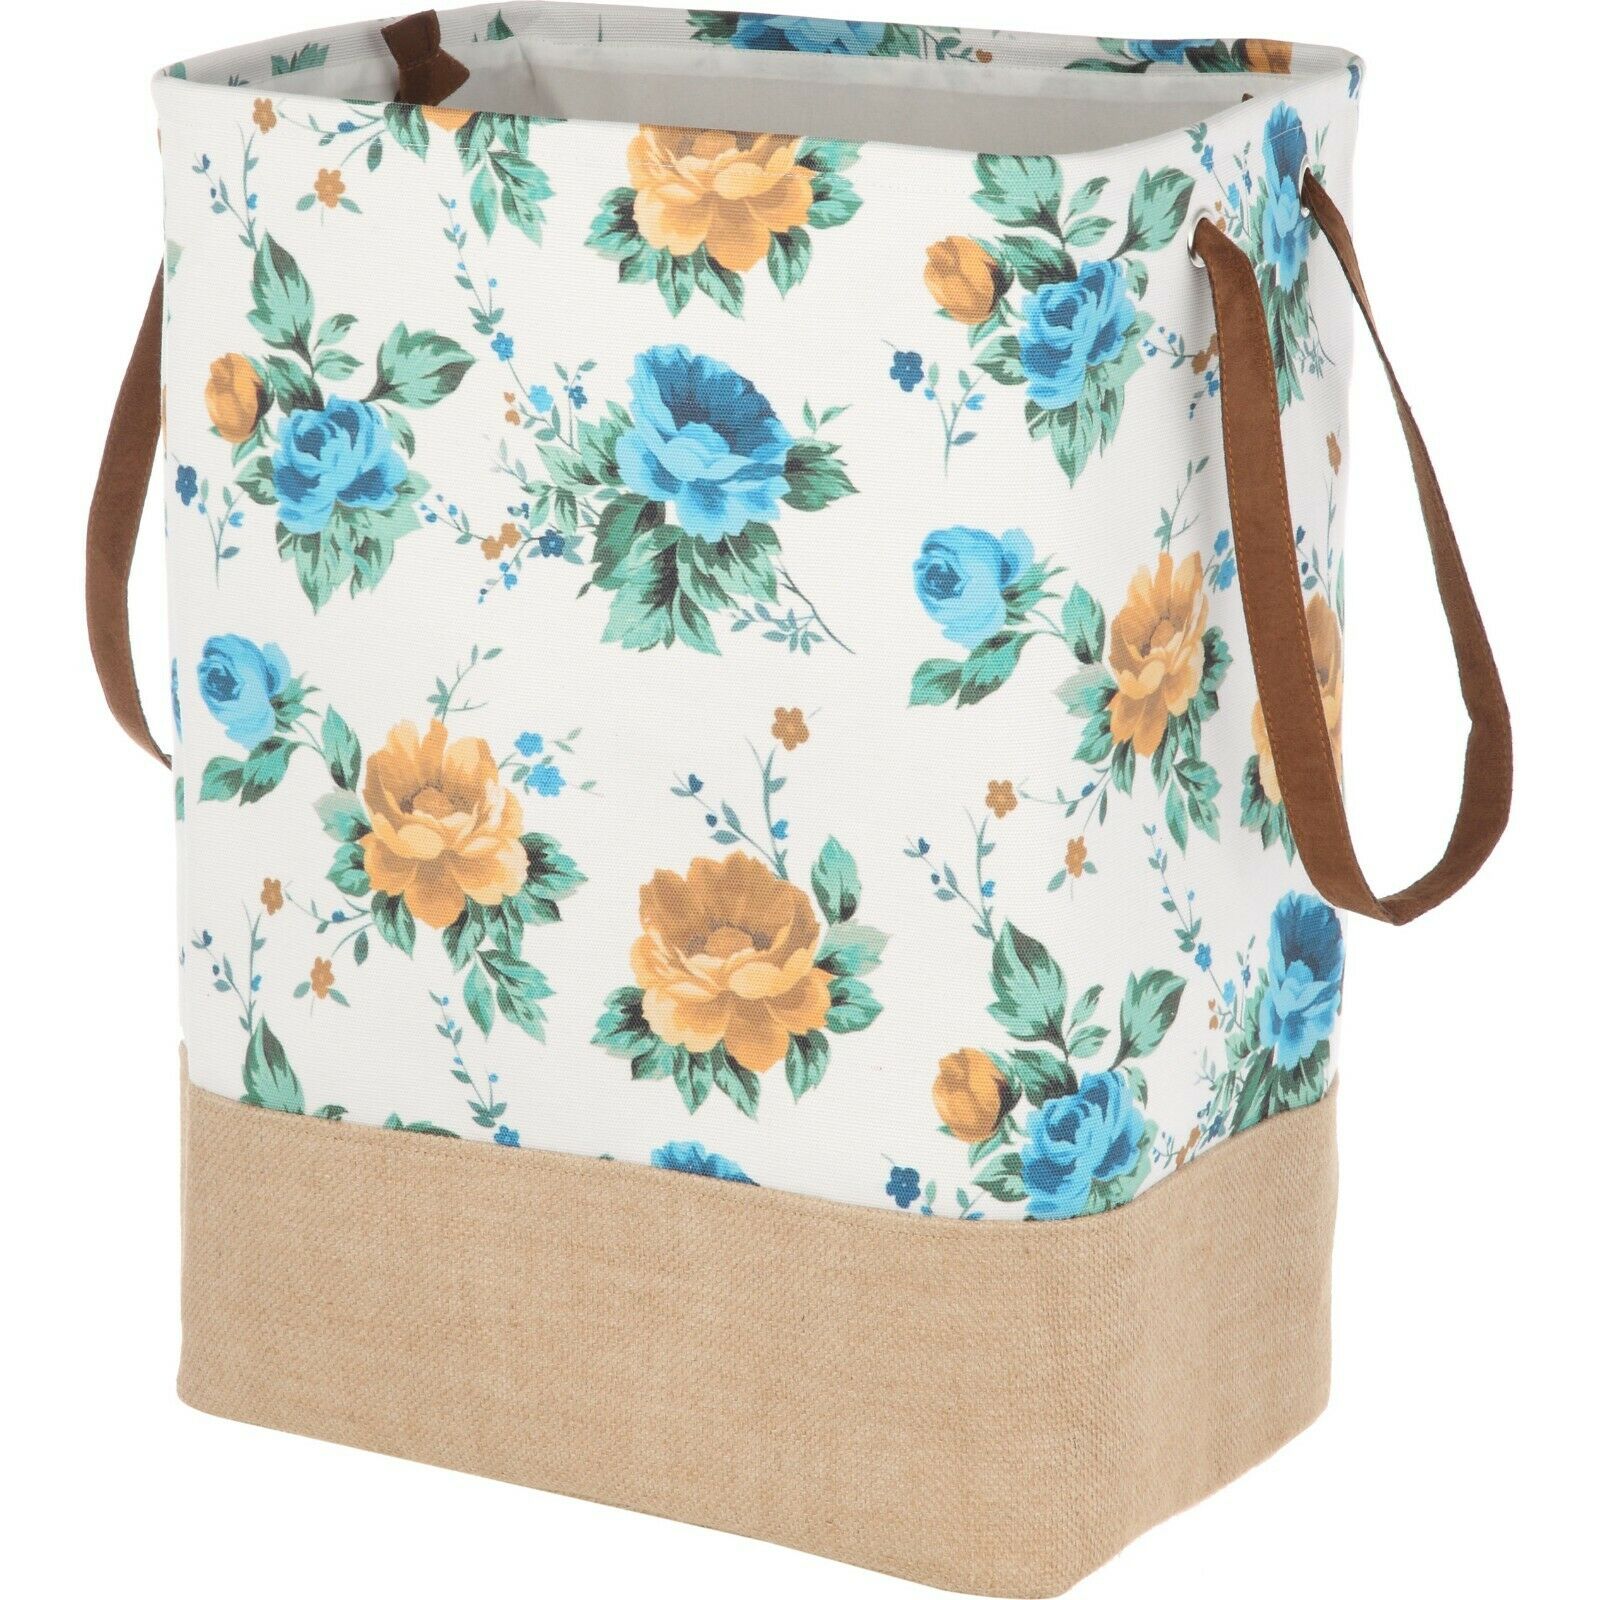 NEW Pioneer Woman Rose Shadow Canvas Hamper - White Floral Laundry Tote